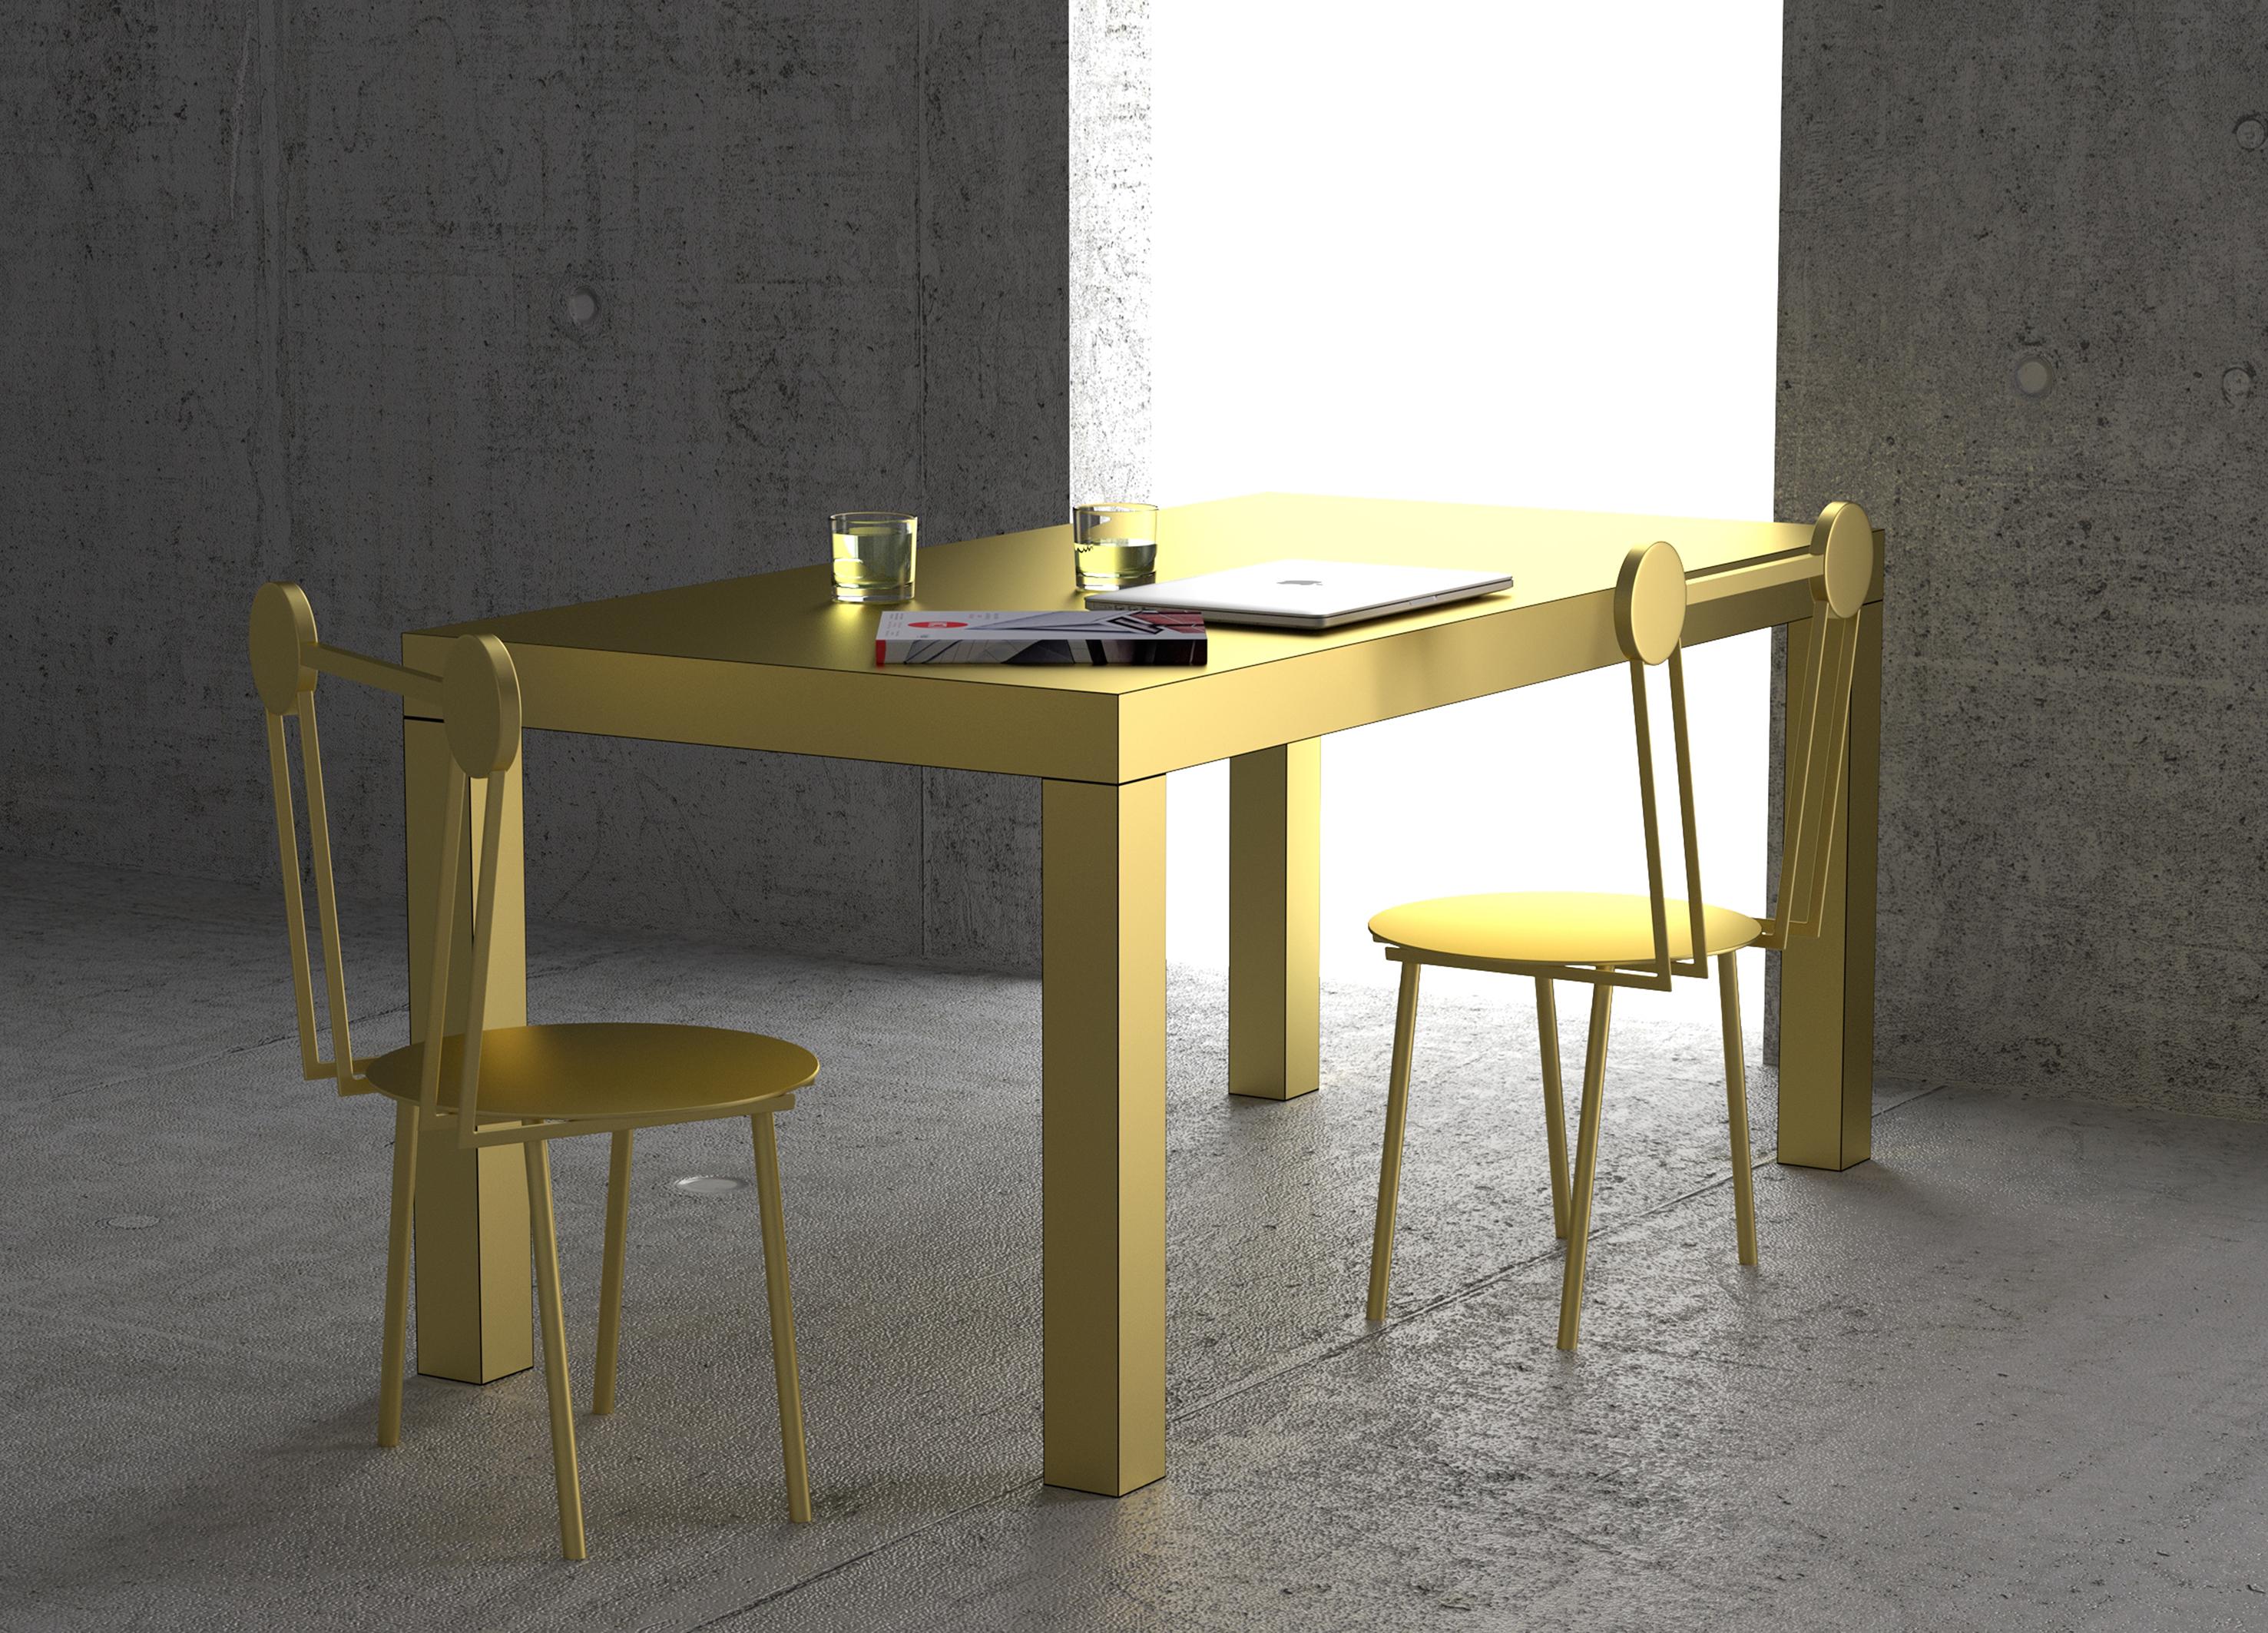 Hitan is a multifunctional table entirely covered by metal HPL Laminates.

Its minimalist structure comprises a rectangular top supported by four square cross-section legs. 
The manufacturing process and research on metal surfaces treatment and